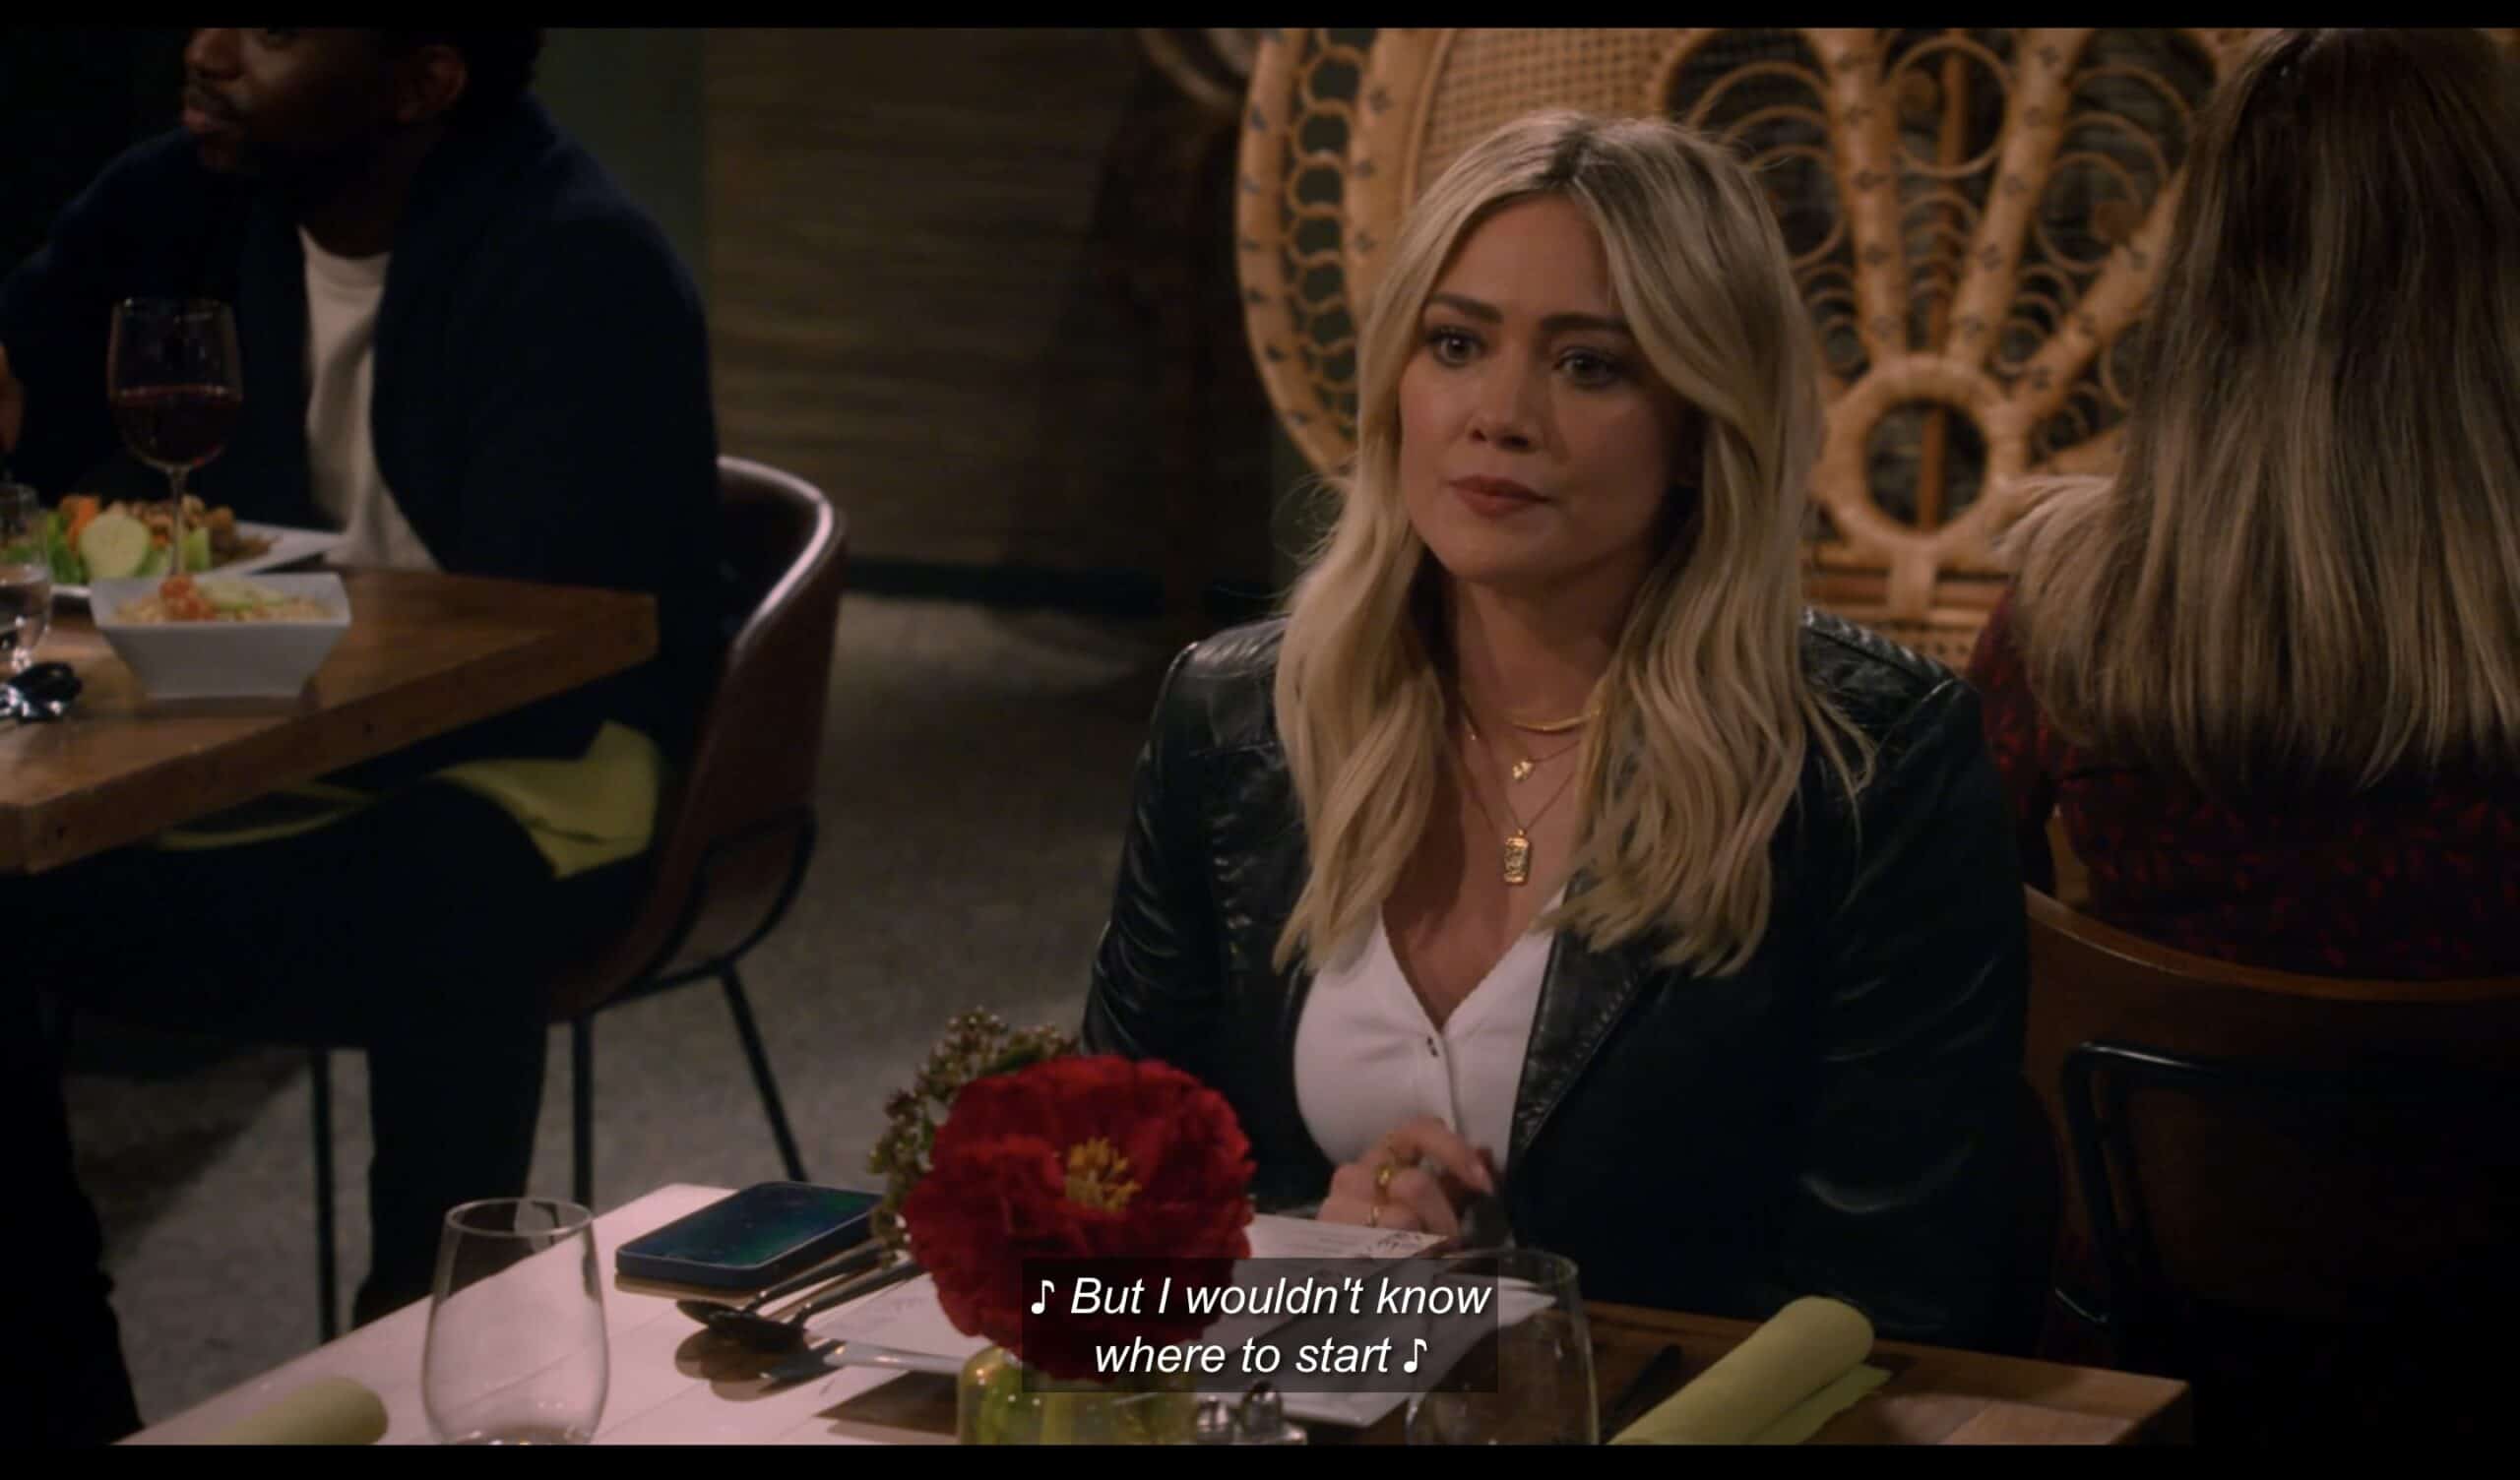 Sophie (Hillary Duff) waiting at a table in a restaurant